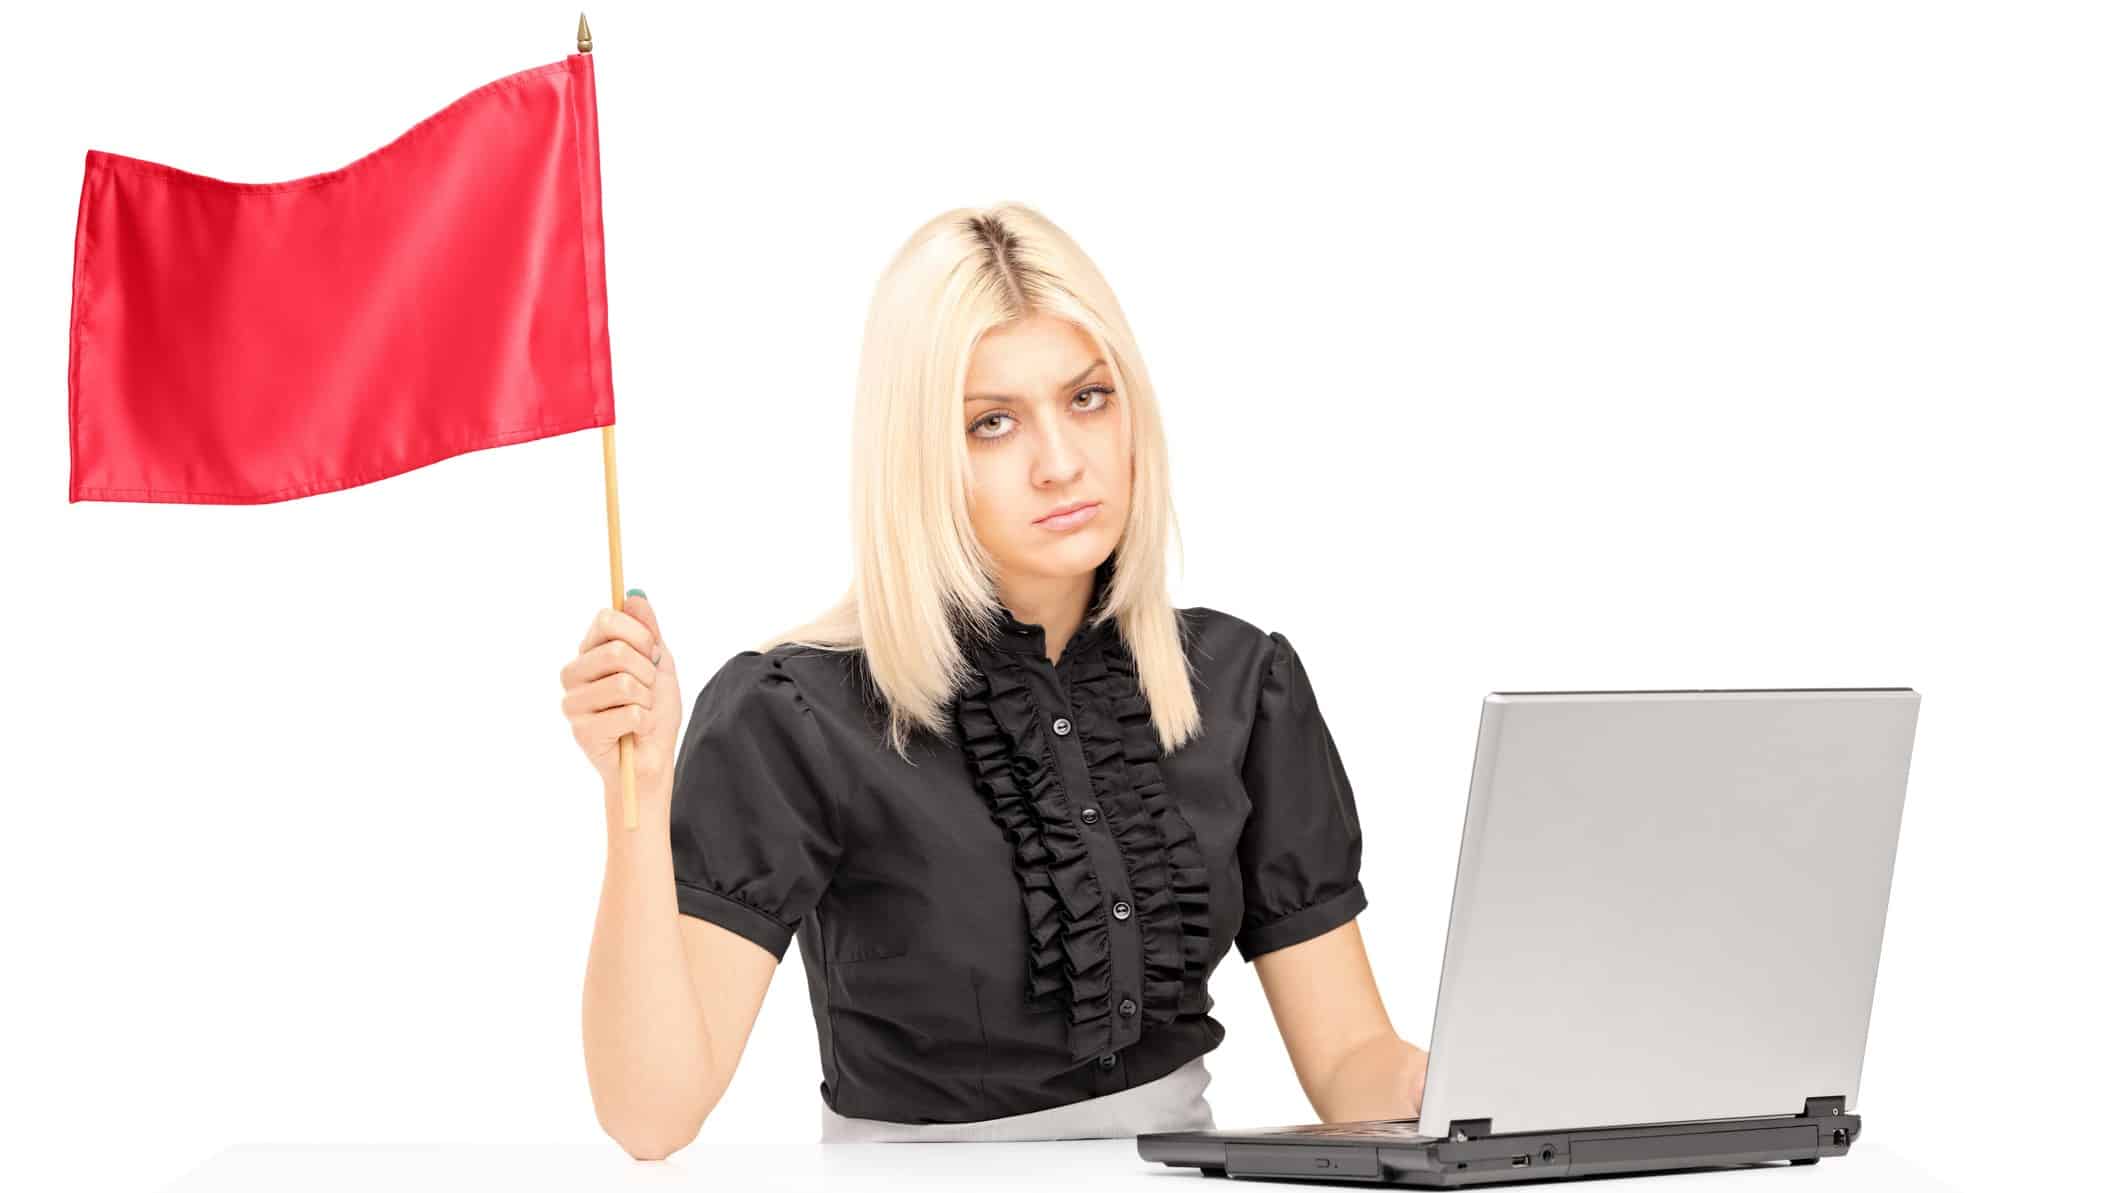 A business woman looks unhappy while she flies a red flag at her laptop.